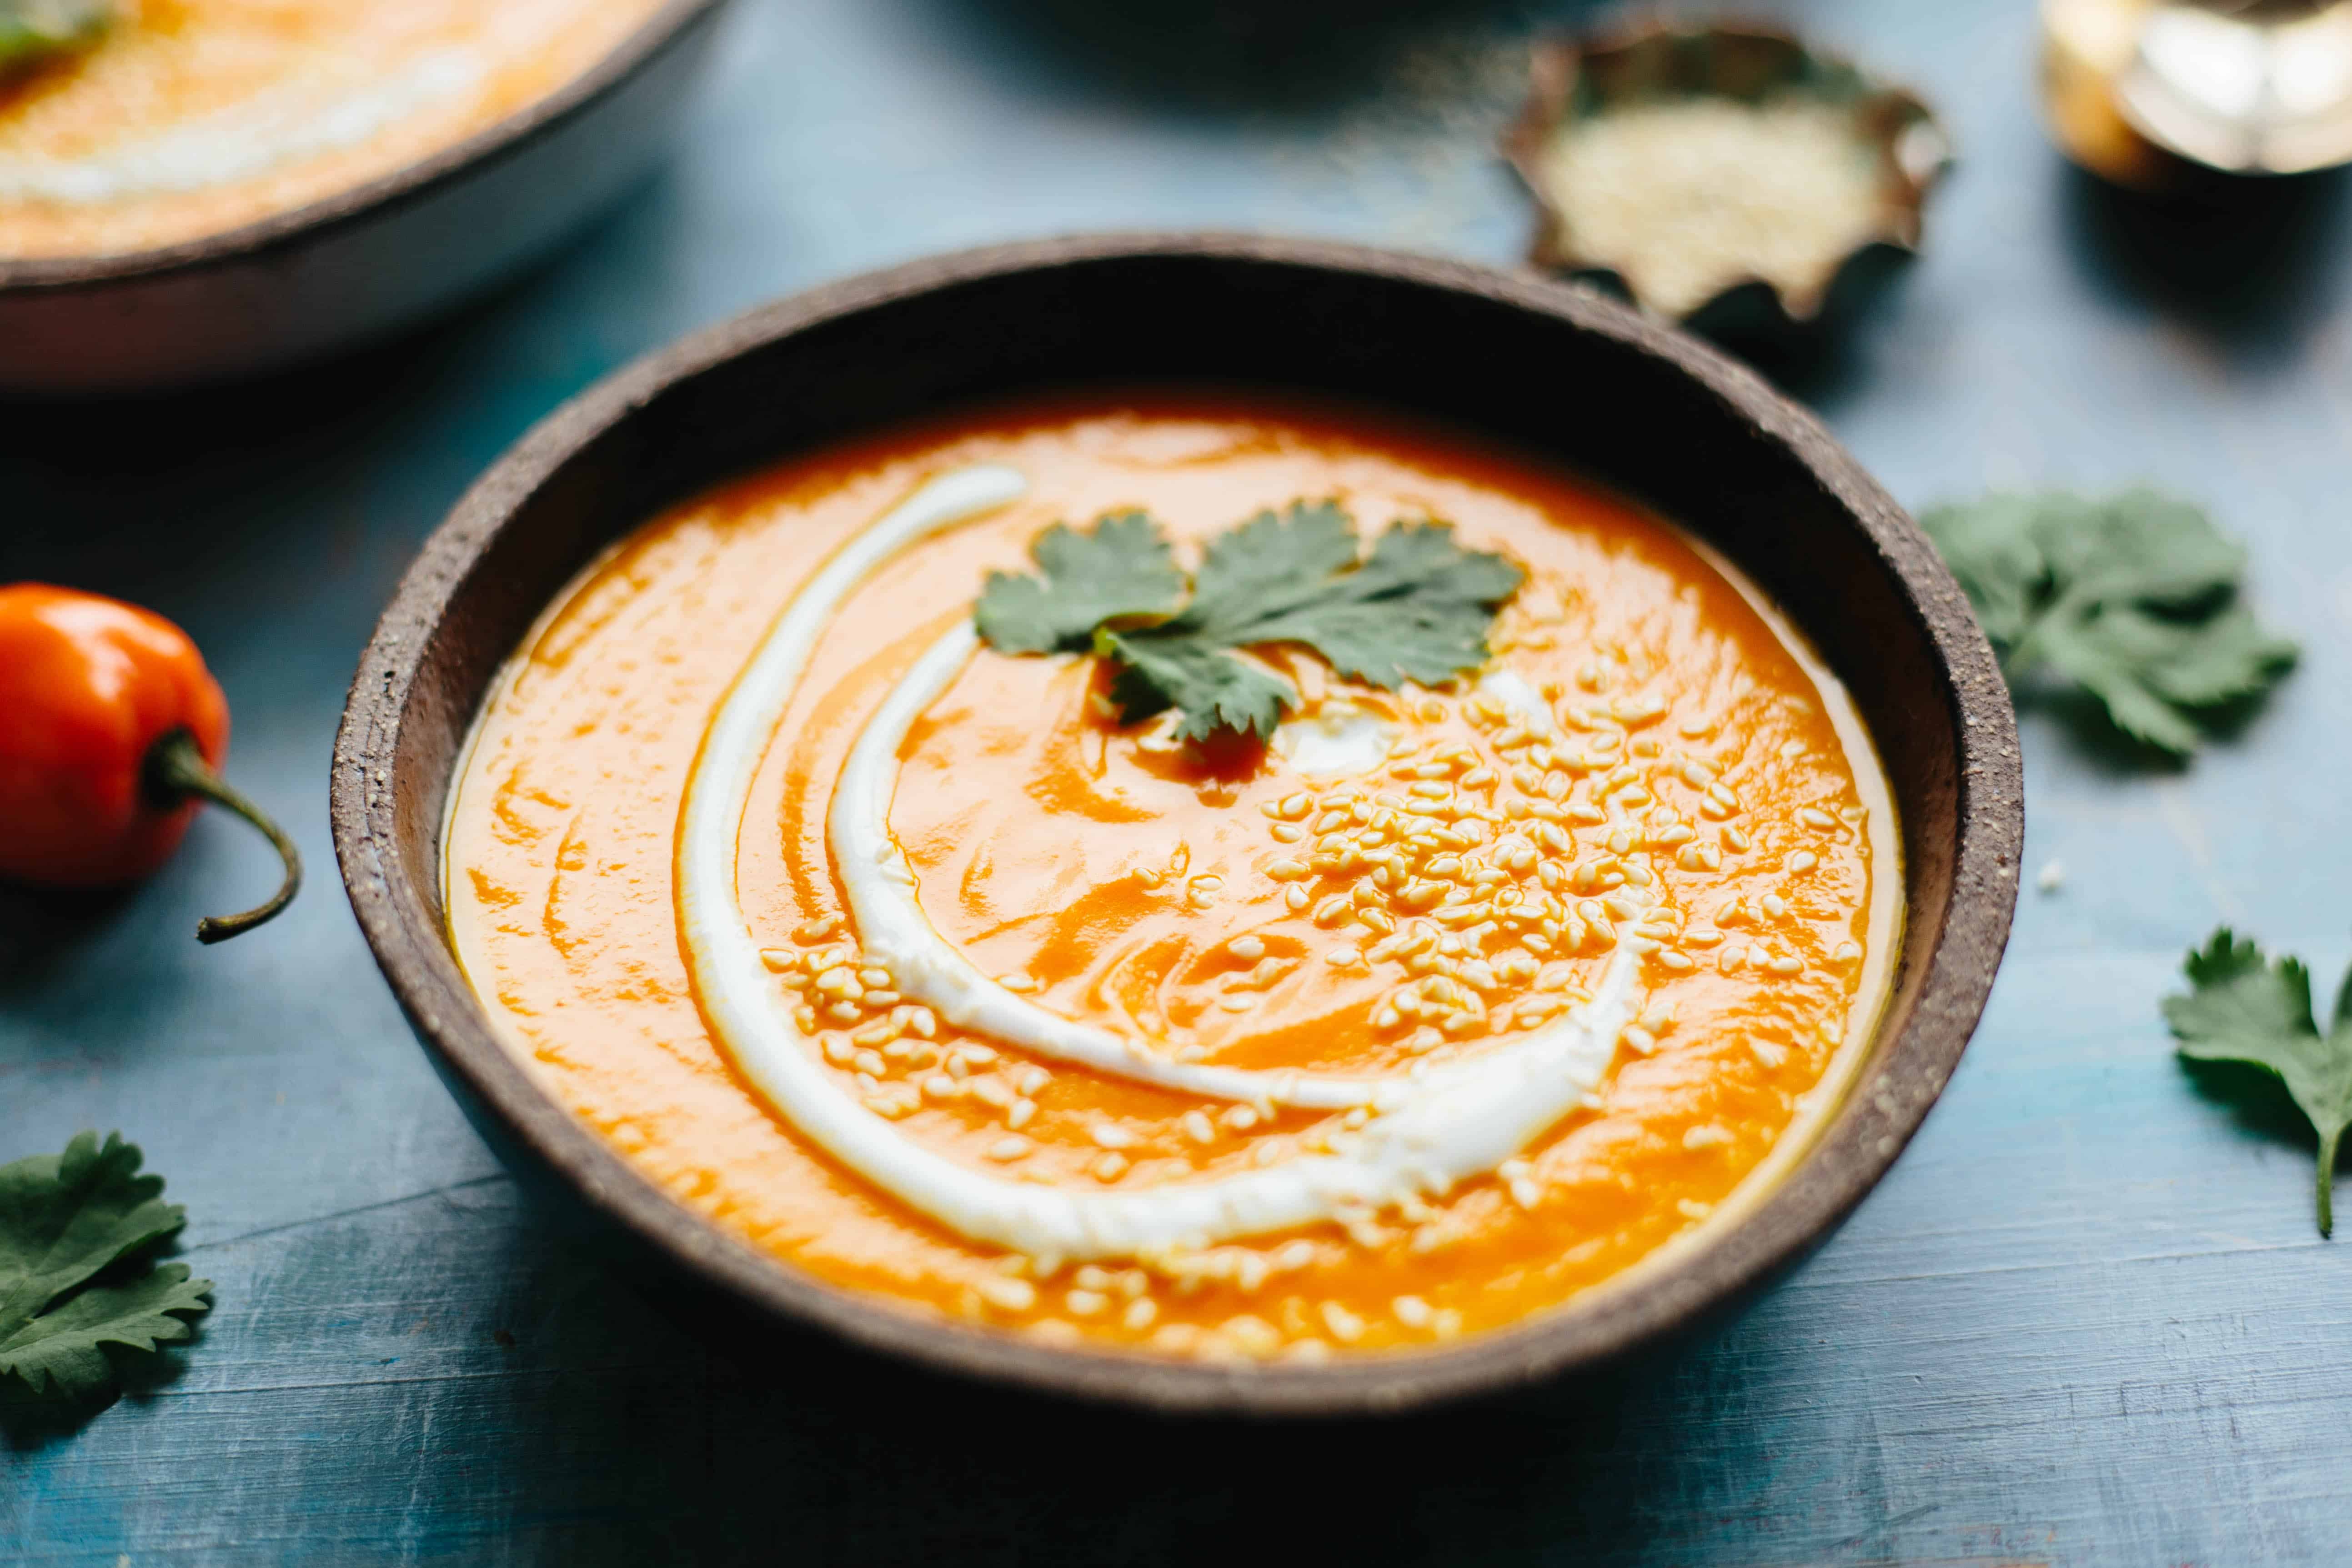 20 Minute Spicy Carrot Soup with Yogurt + Sesame! It's gluten free, vegan friendly, mildly spiced, smooth, creamy and totally delicious! A warming winter soup perfect for snow days! #spicy #easy #carrot #soup #habanero #recipe #yogurt #sesame #glutenfree #vegan #plantbased | ColeyCooks.com